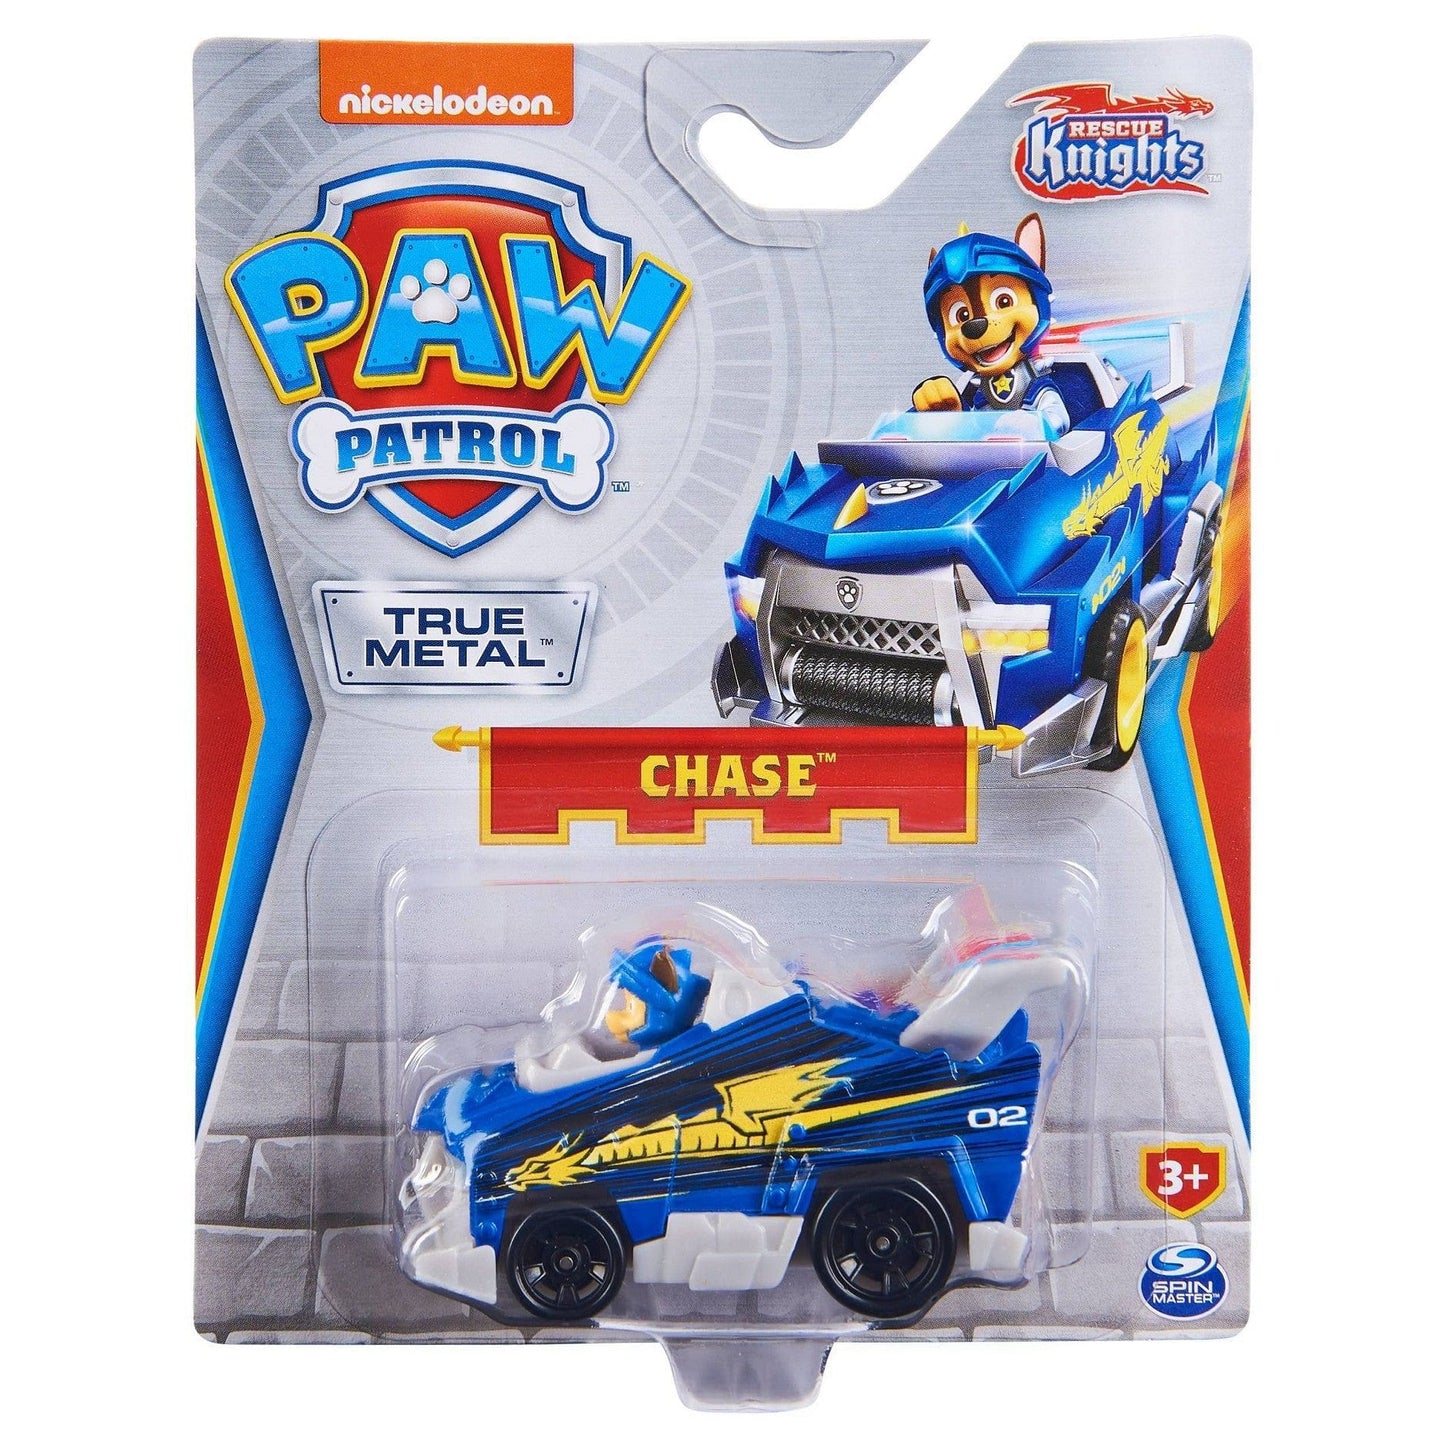 Paw Patrol Metal Die-Cast Vehicle - Rescue Knights Chase - Shelburne Country Store